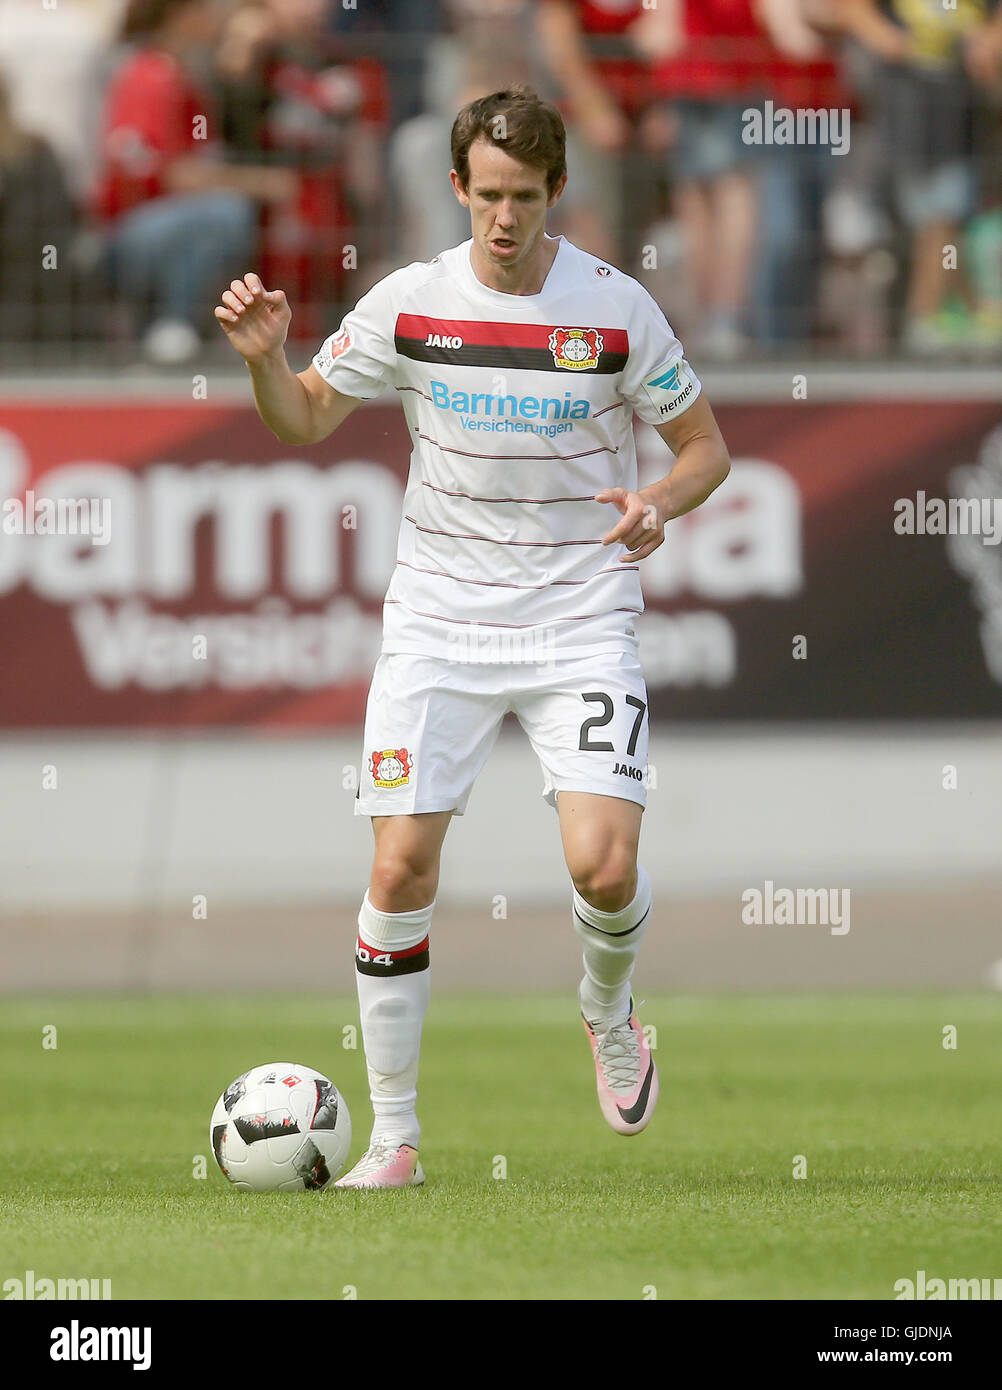 Leverkusen, Germany. 13th Aug, 2016. Leverkusen's Robbie Kruse in action  during the soccer test match between Bayer Leverkusen and Real Sociedad at  BayArena in Leverkusen, Germany, 13 August 2016. PHOTO: INA  FASSBENDER/dpa/Alamy